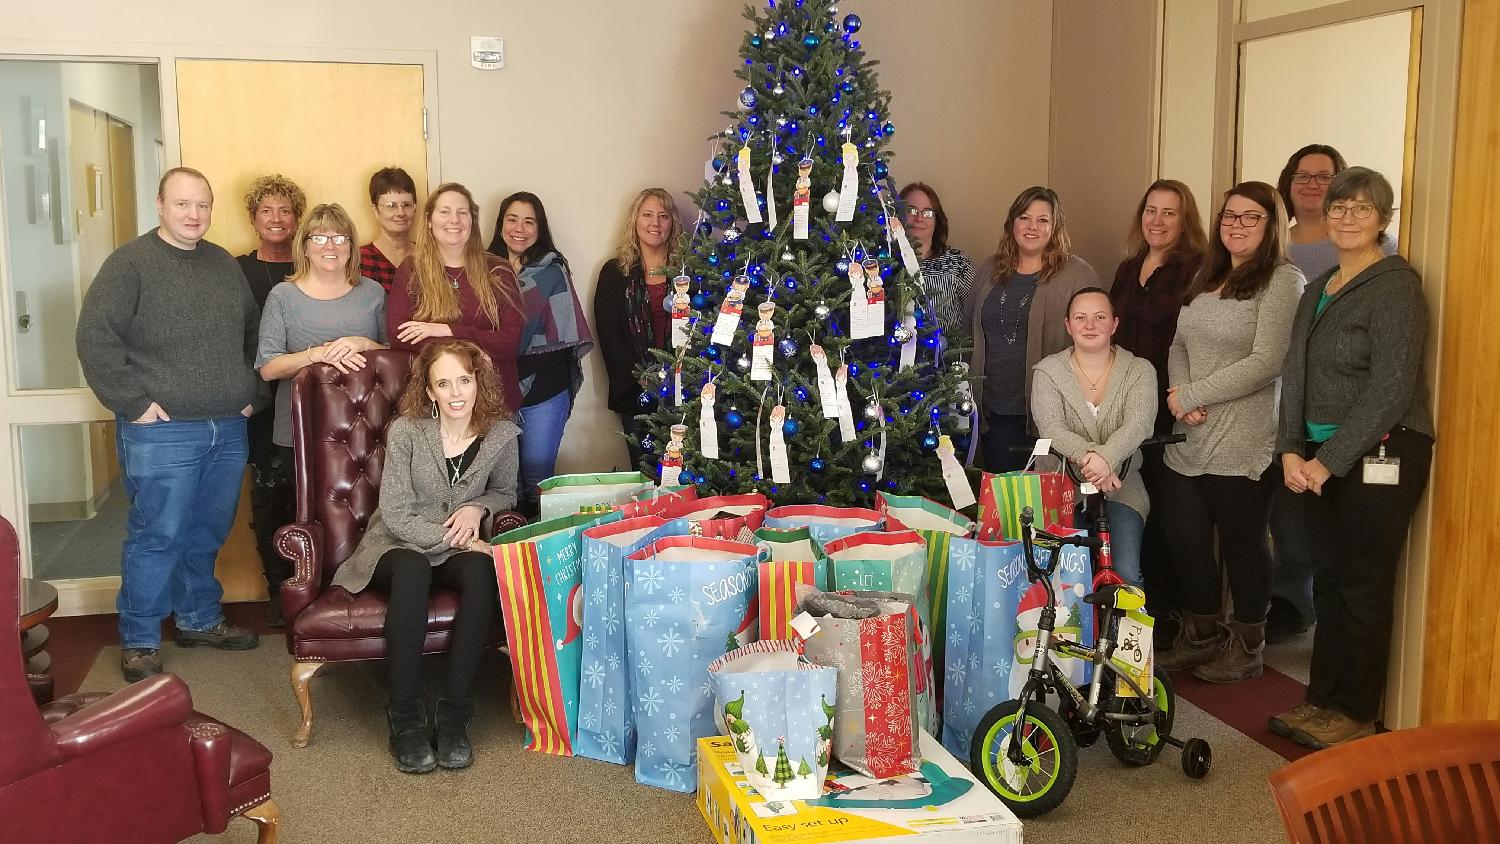 Members of our Inter-Plan Programs department raised over $700 during the year to purchase gifts for children in need.